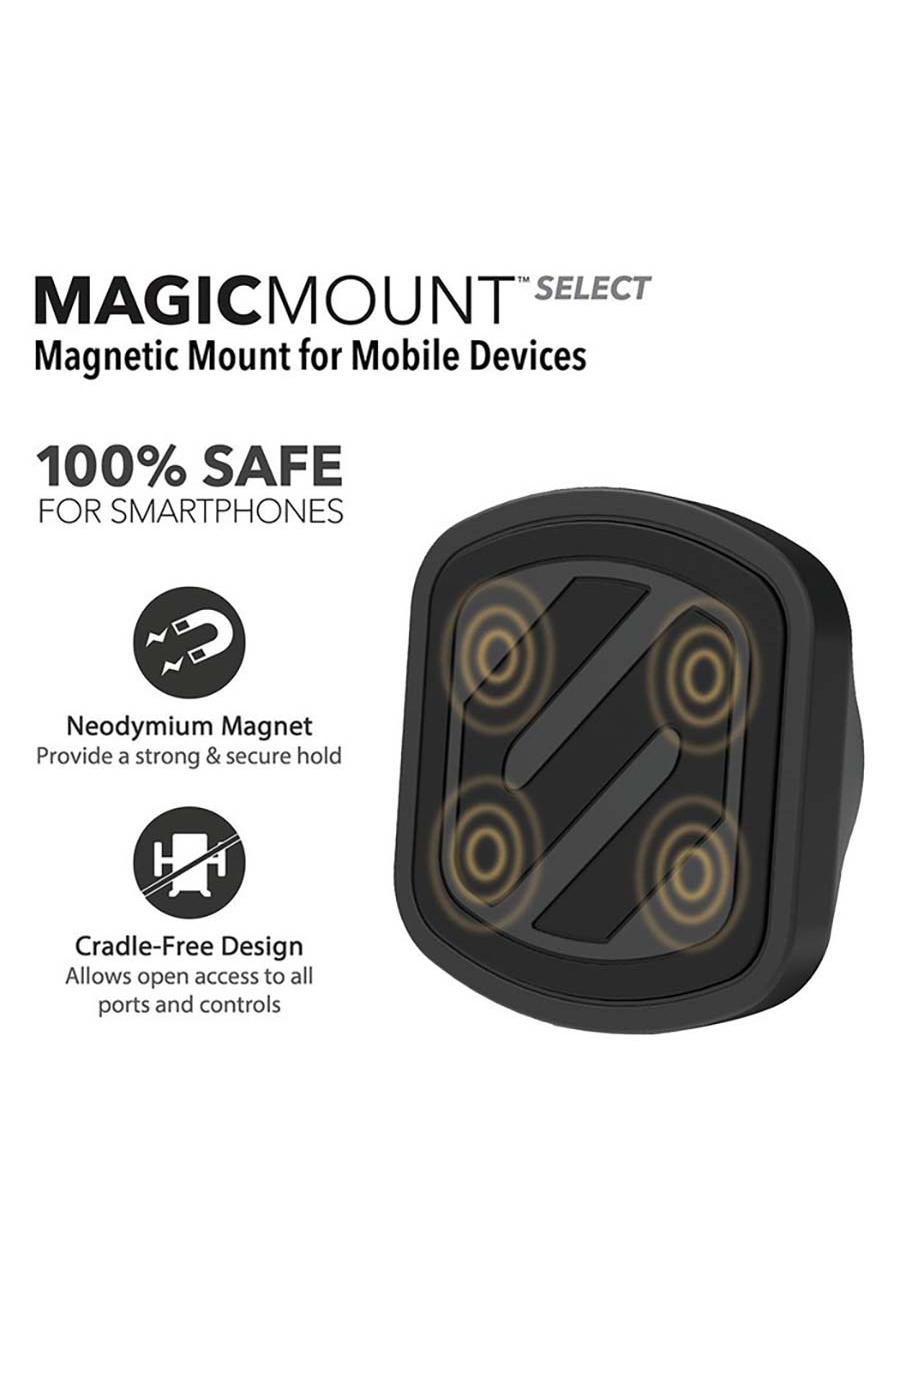 Scosche MagicMount Select Vent Mount; image 2 of 2